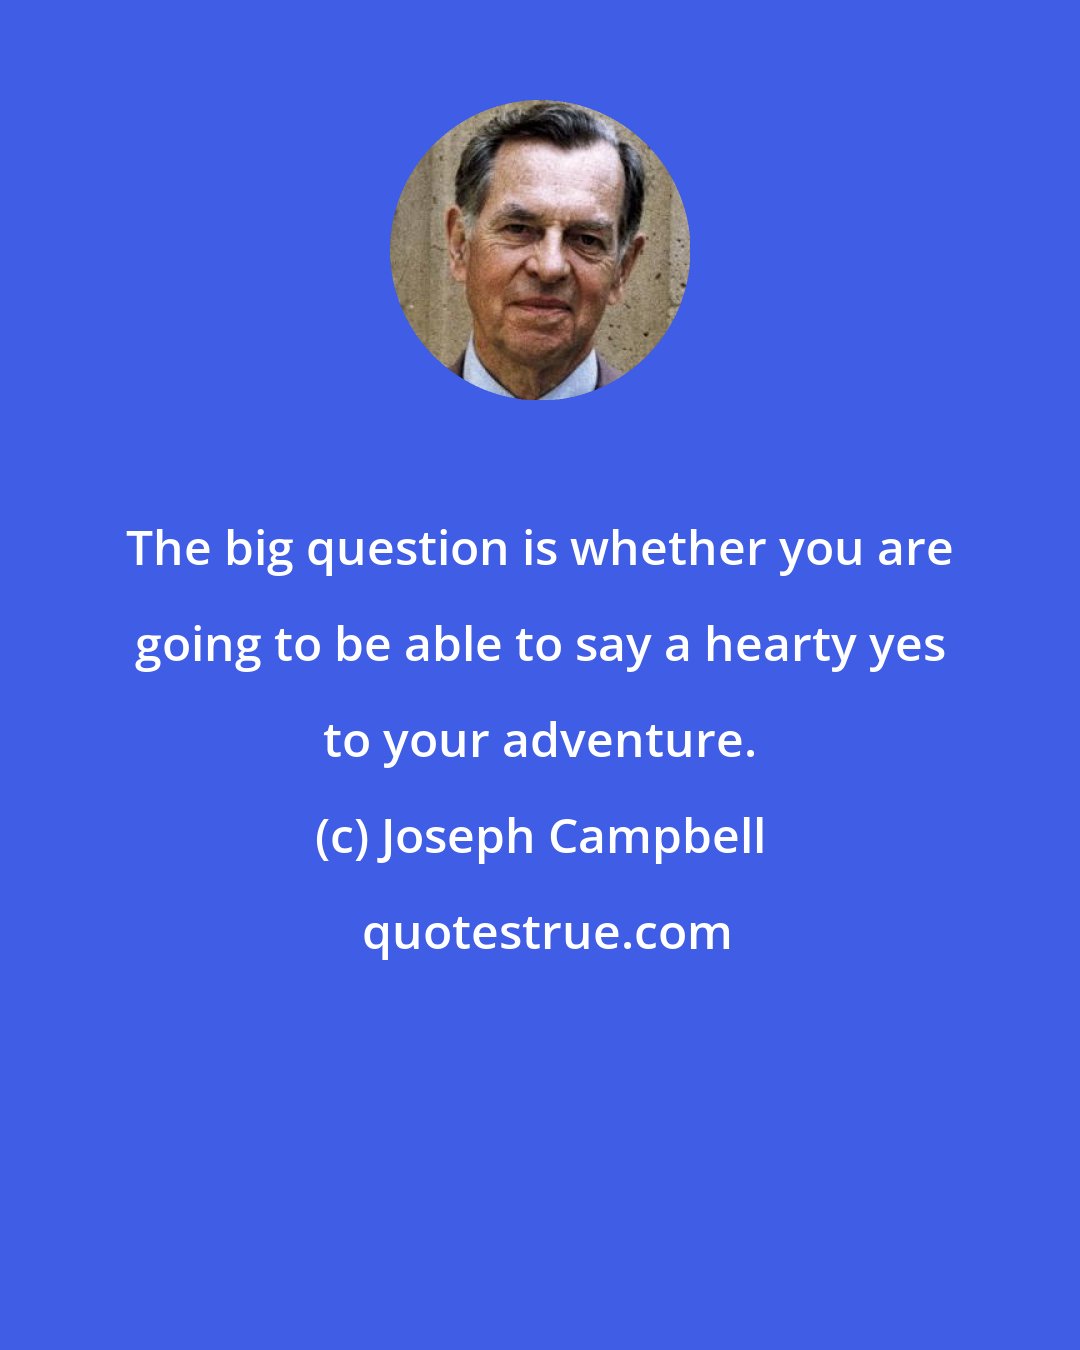 Joseph Campbell: The big question is whether you are going to be able to say a hearty yes to your adventure.